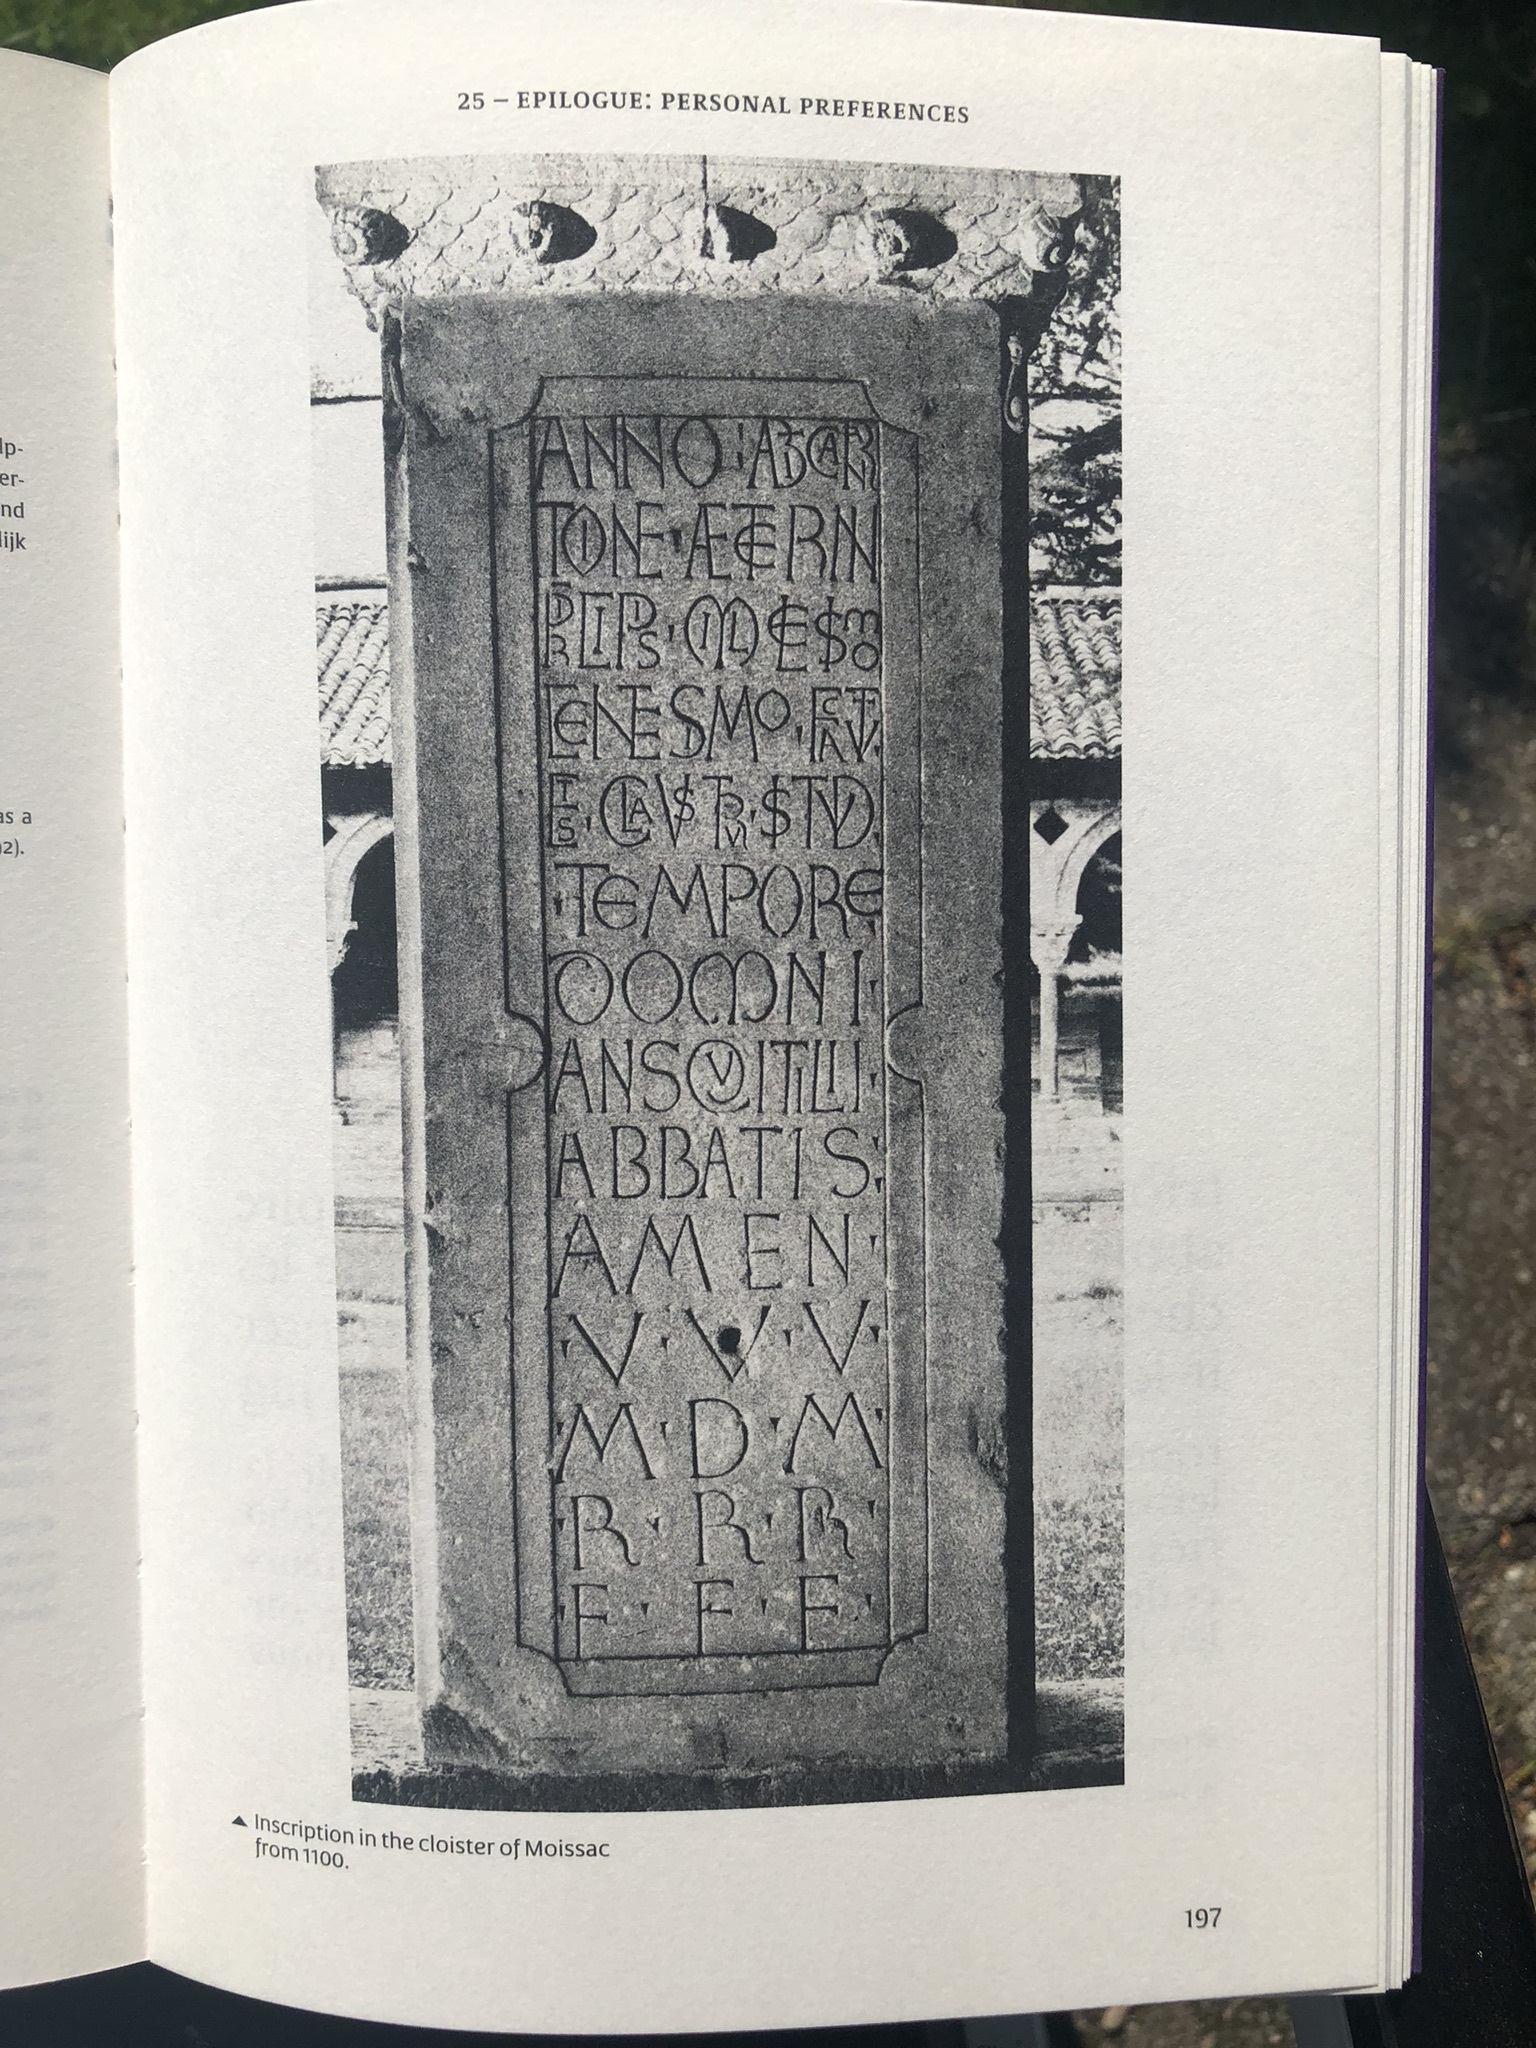 Inscription, cloister of Moissac, France, around 1100 AD (from: Typography of Type Design by Gerard Unger)